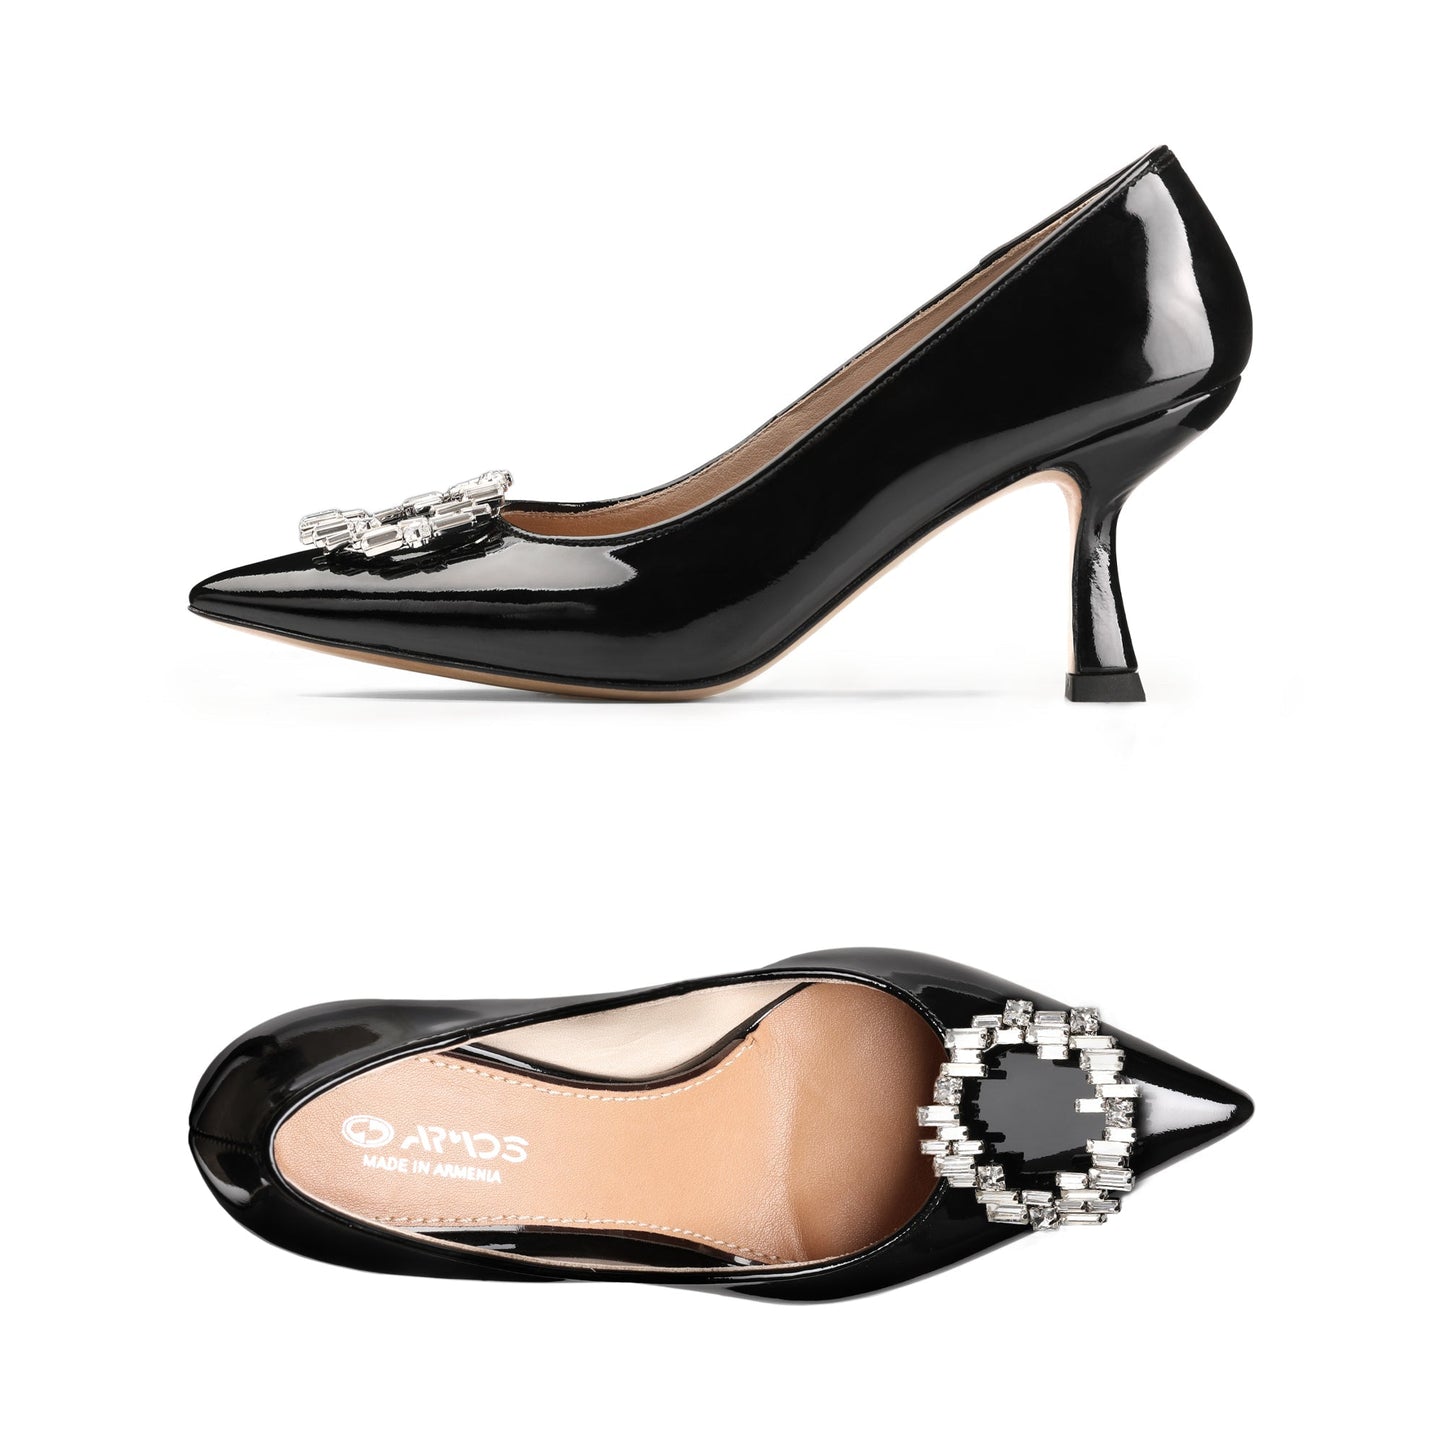 Pumps with a brooch